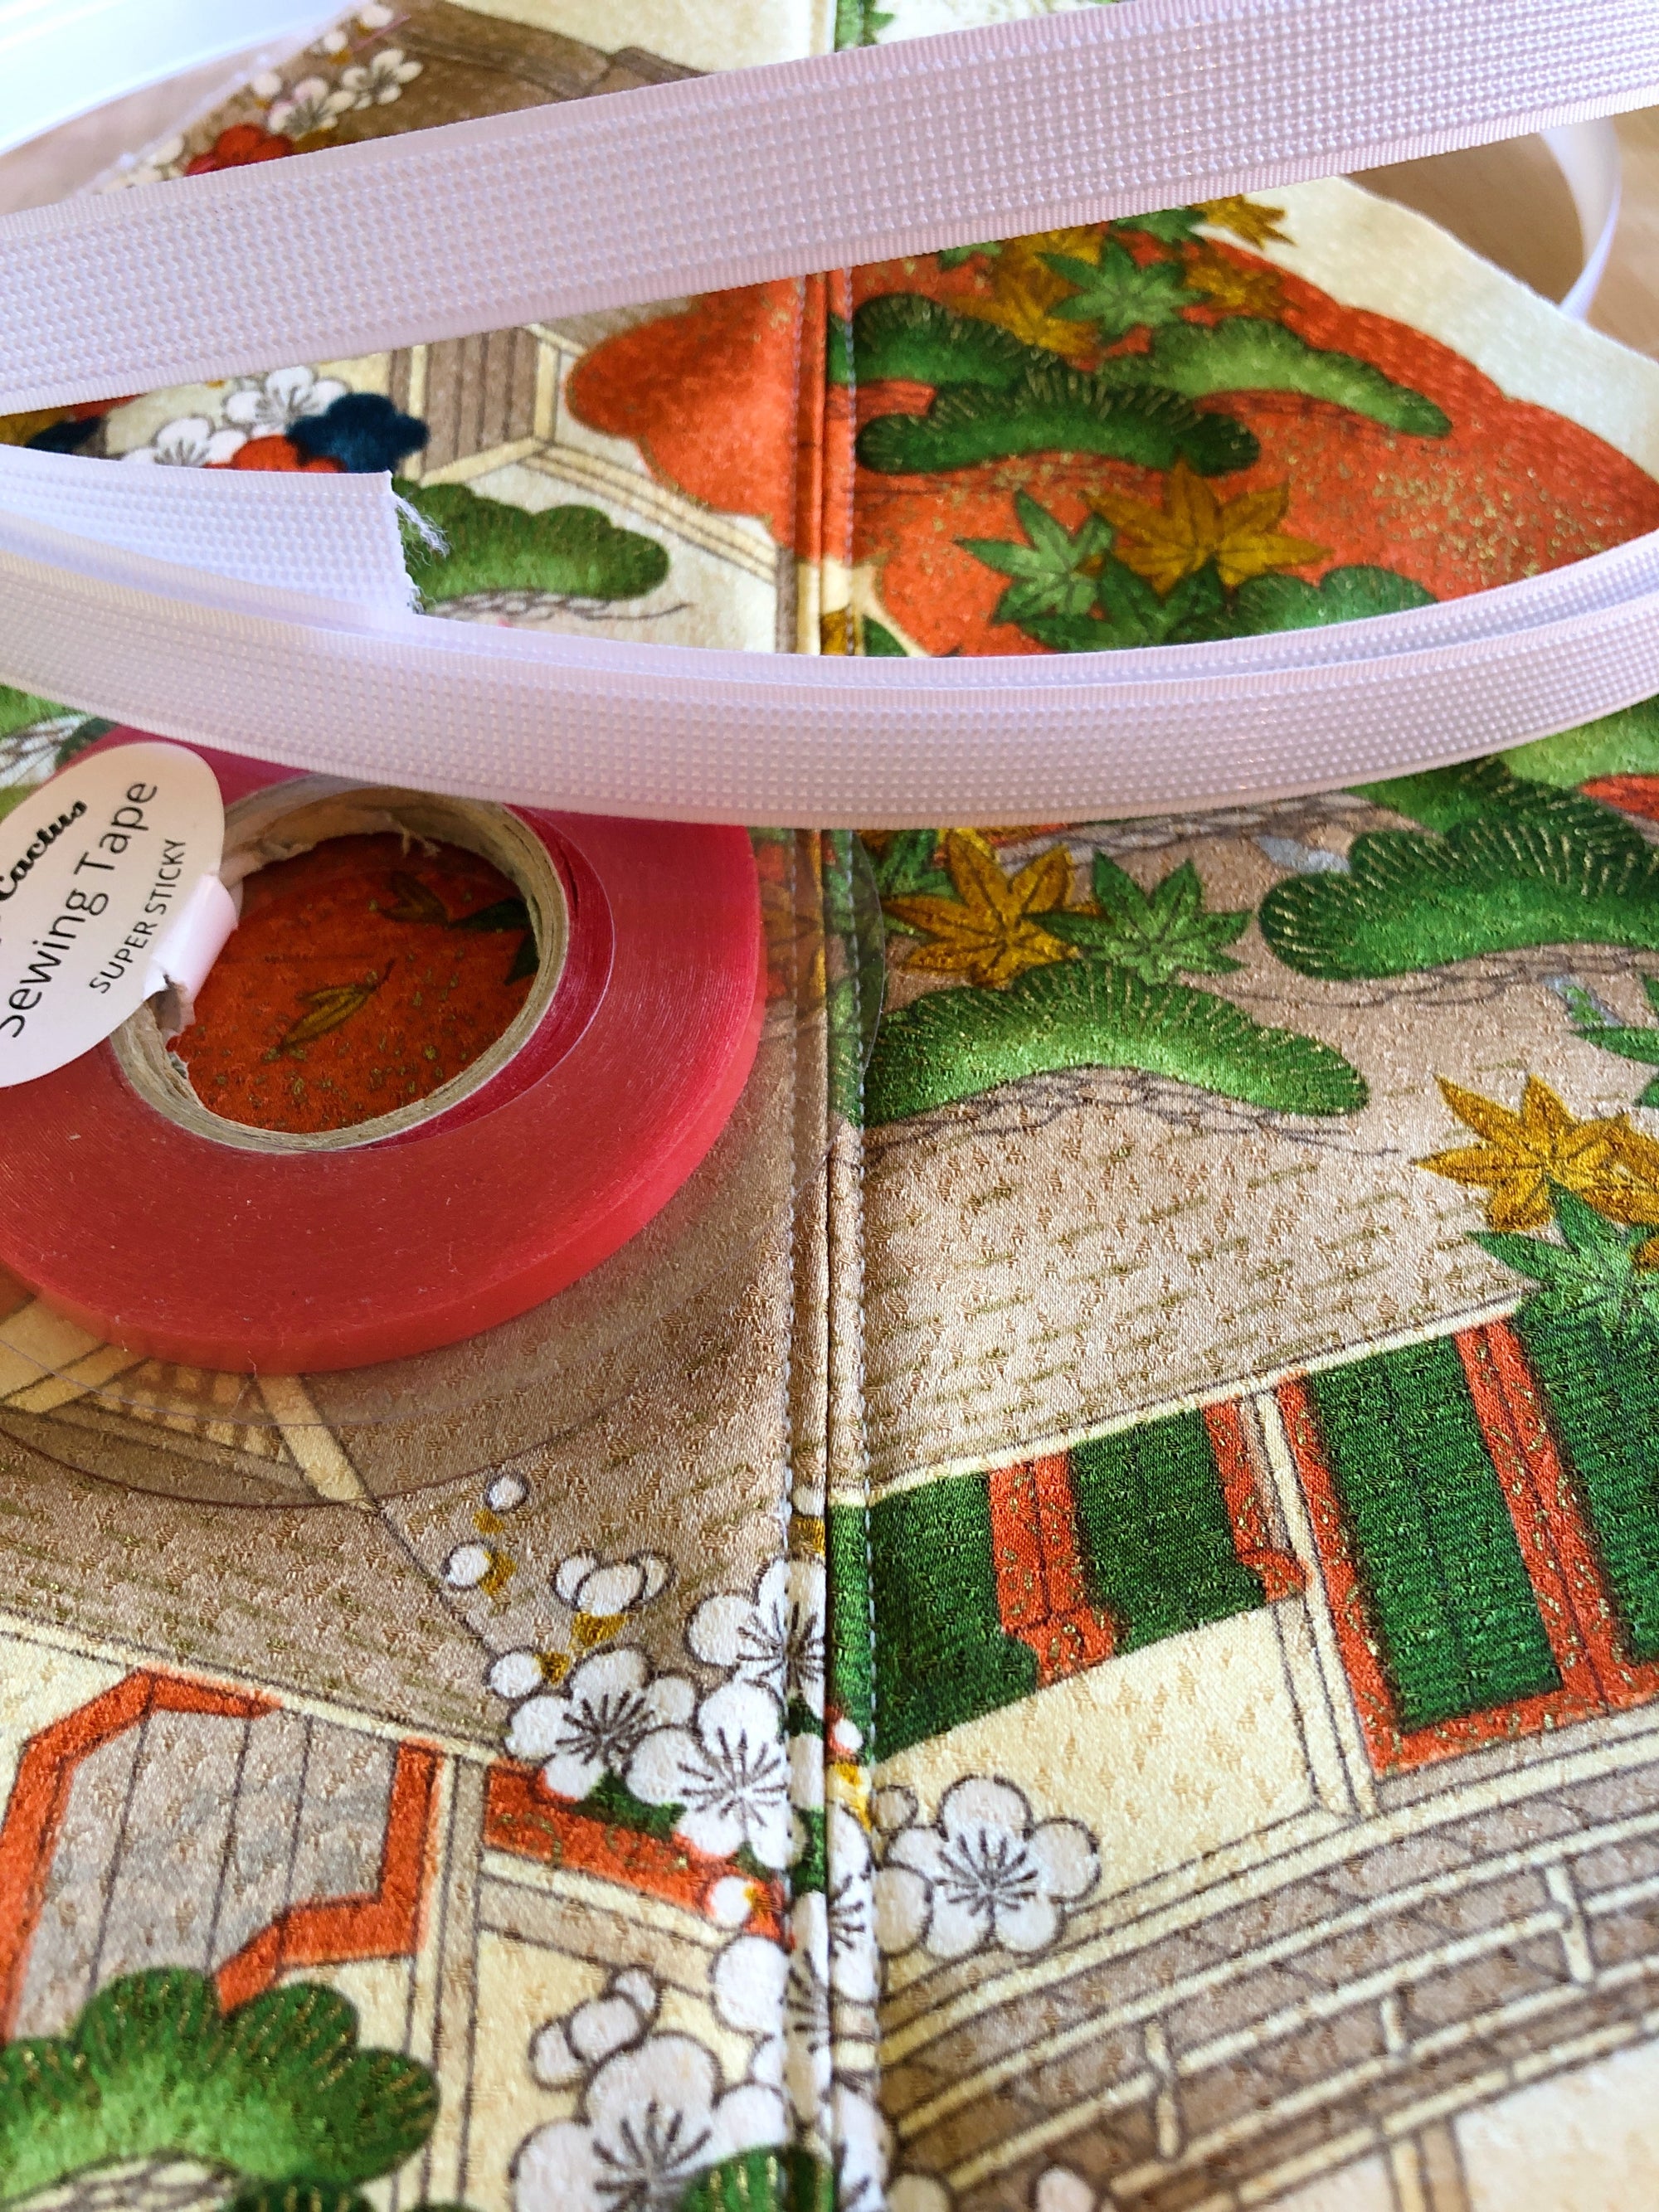 Soft Cactus sewing tape ultimate product test